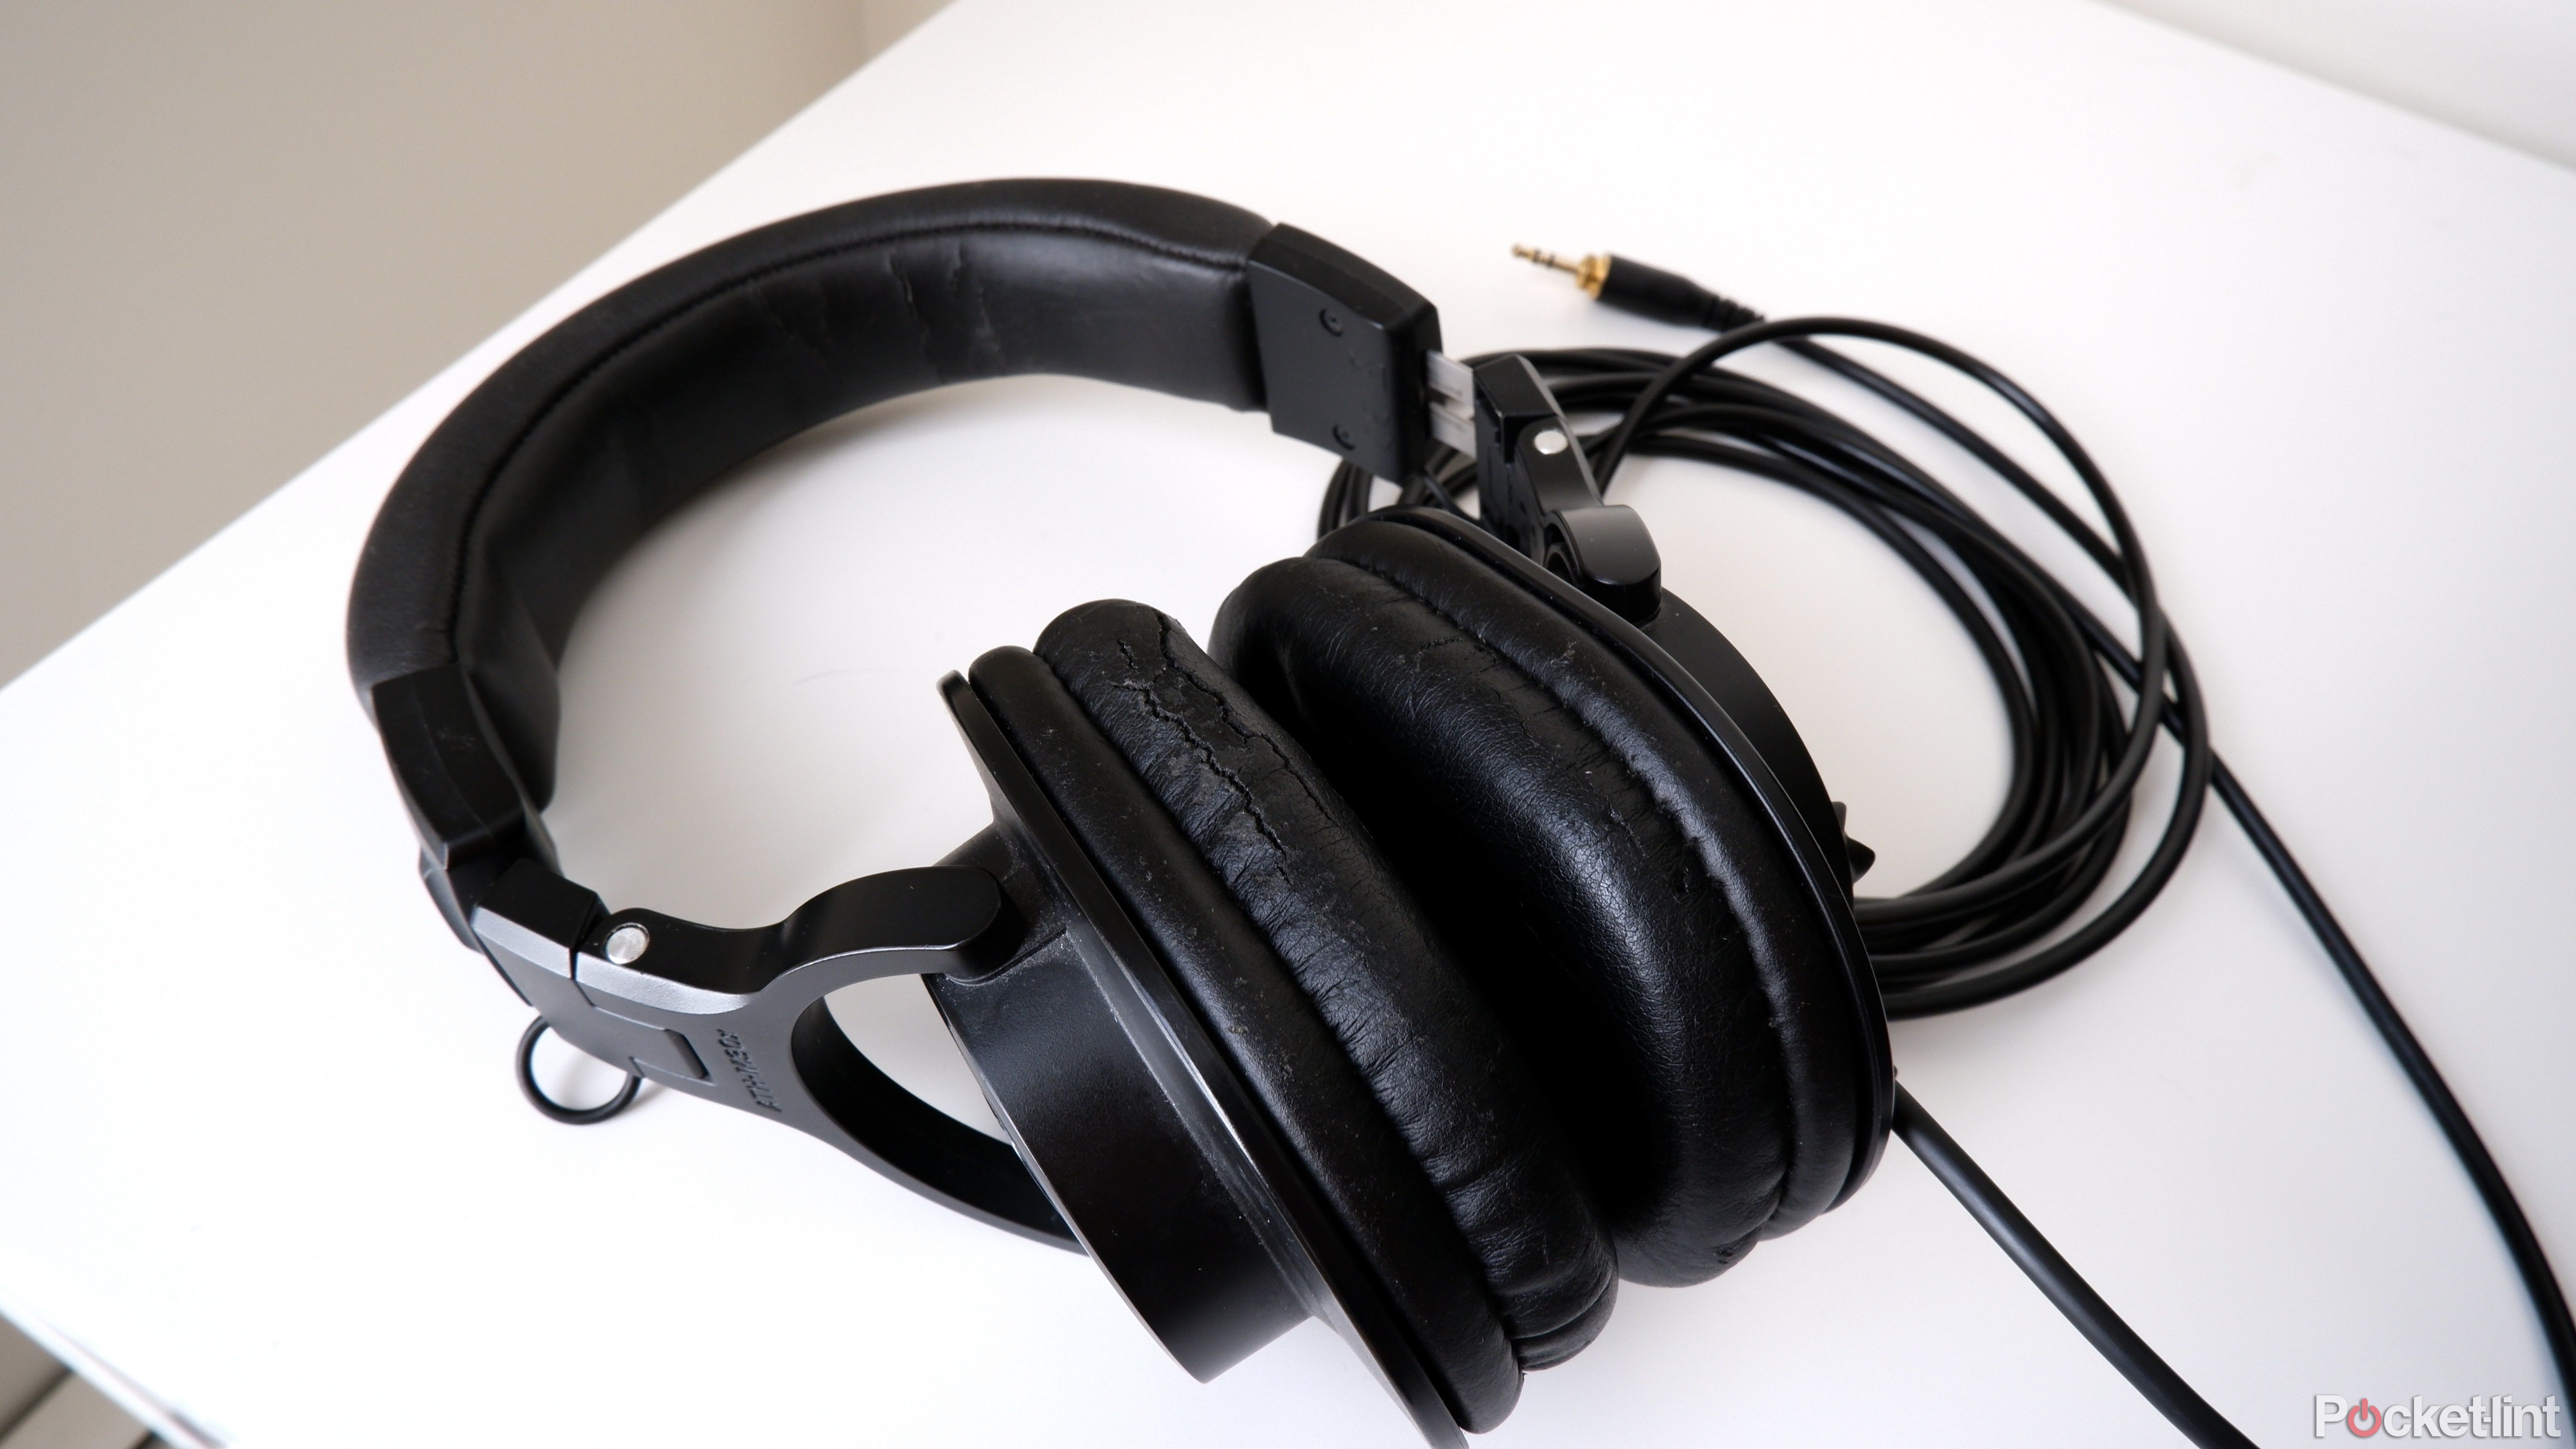 The Audio-Technica ATH-M30x with the whole cable and 3.5mm jack visible